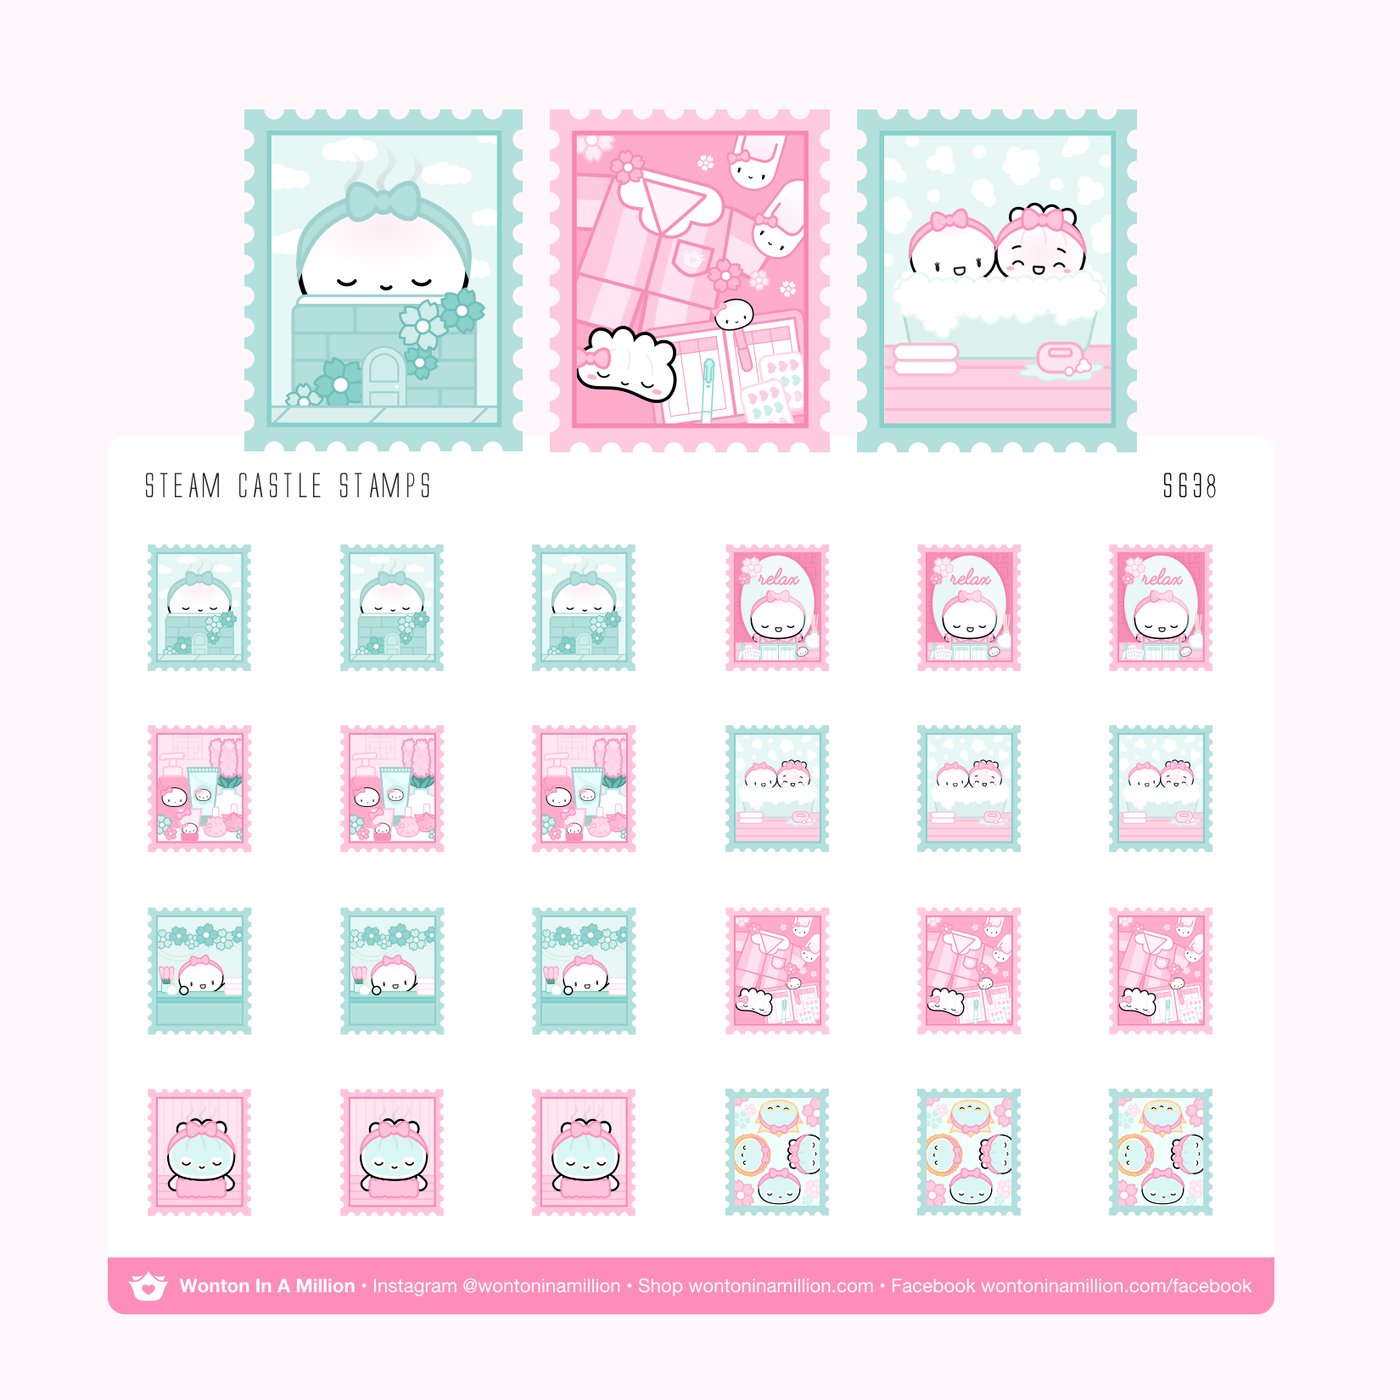 Steam Castle Stamps Stickers